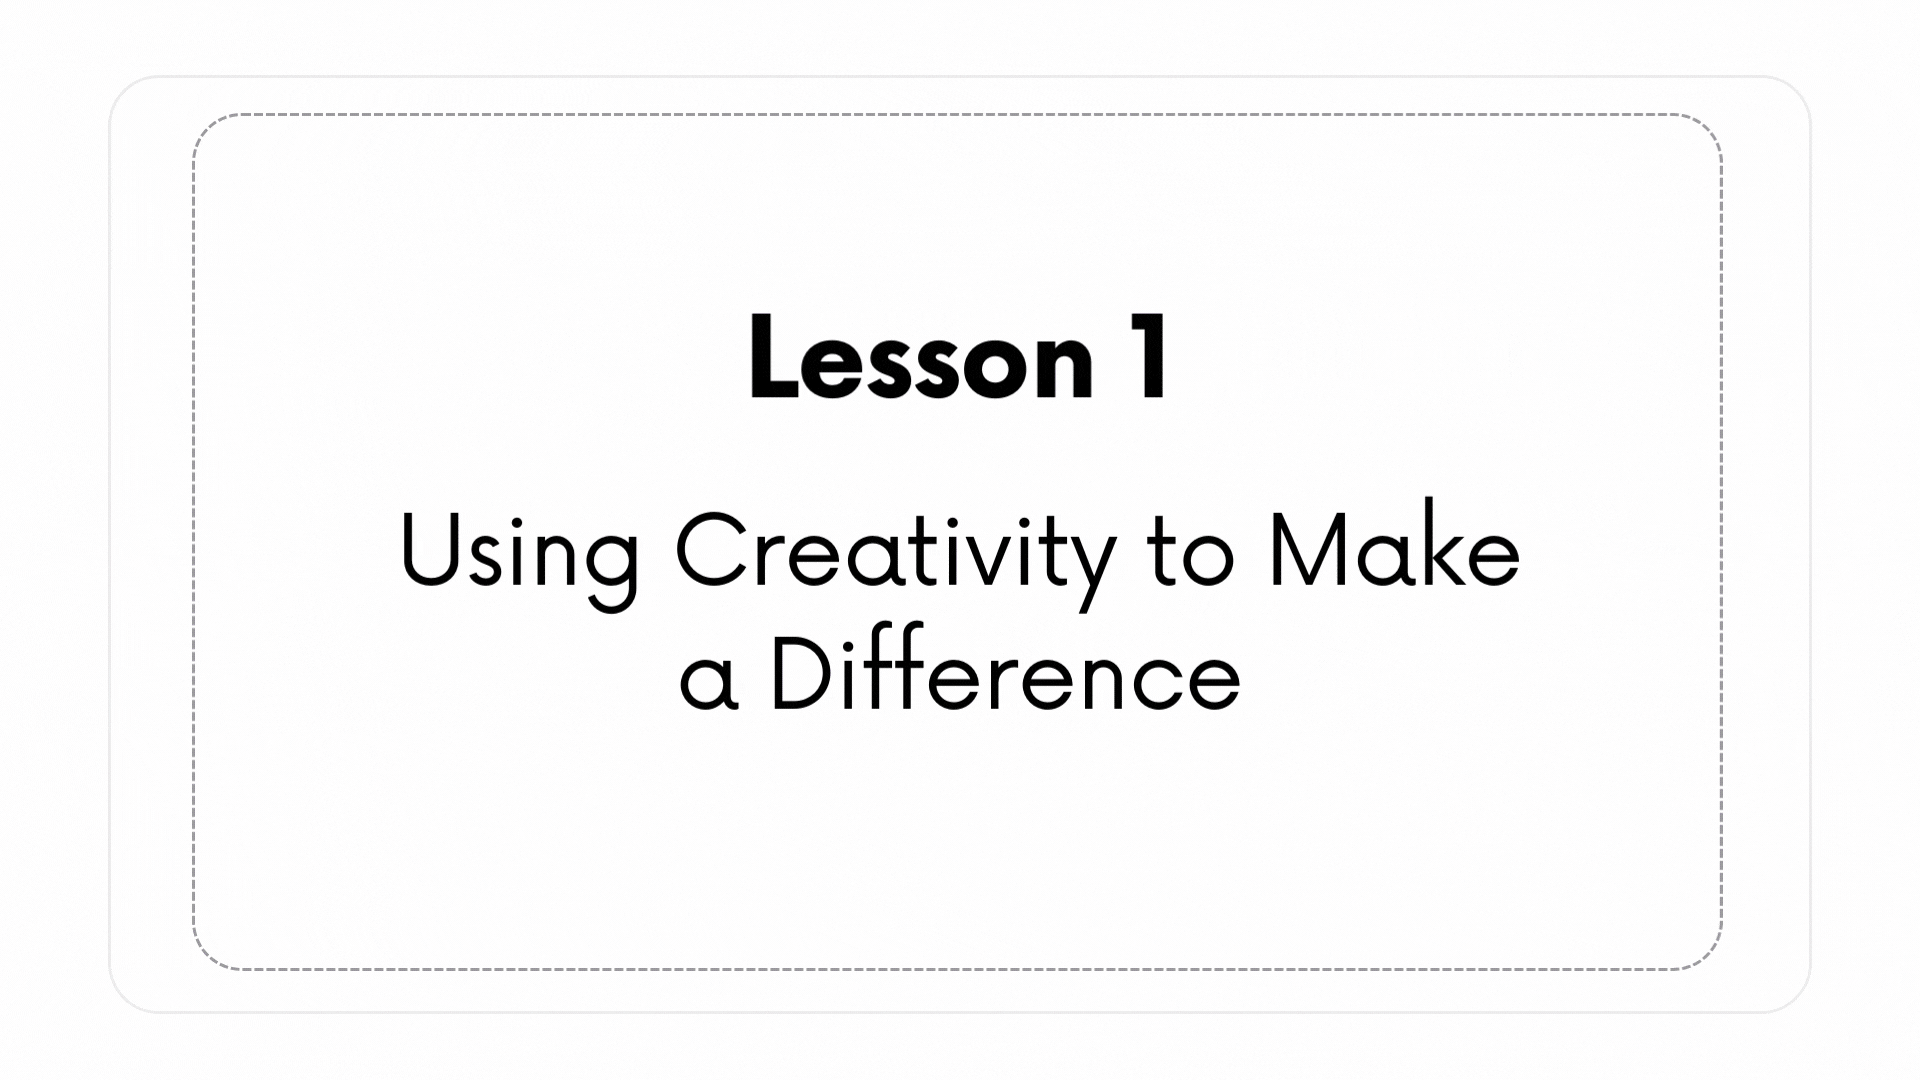 Lesson cover image with colorful design titled “Using Creativity to make a difference.”